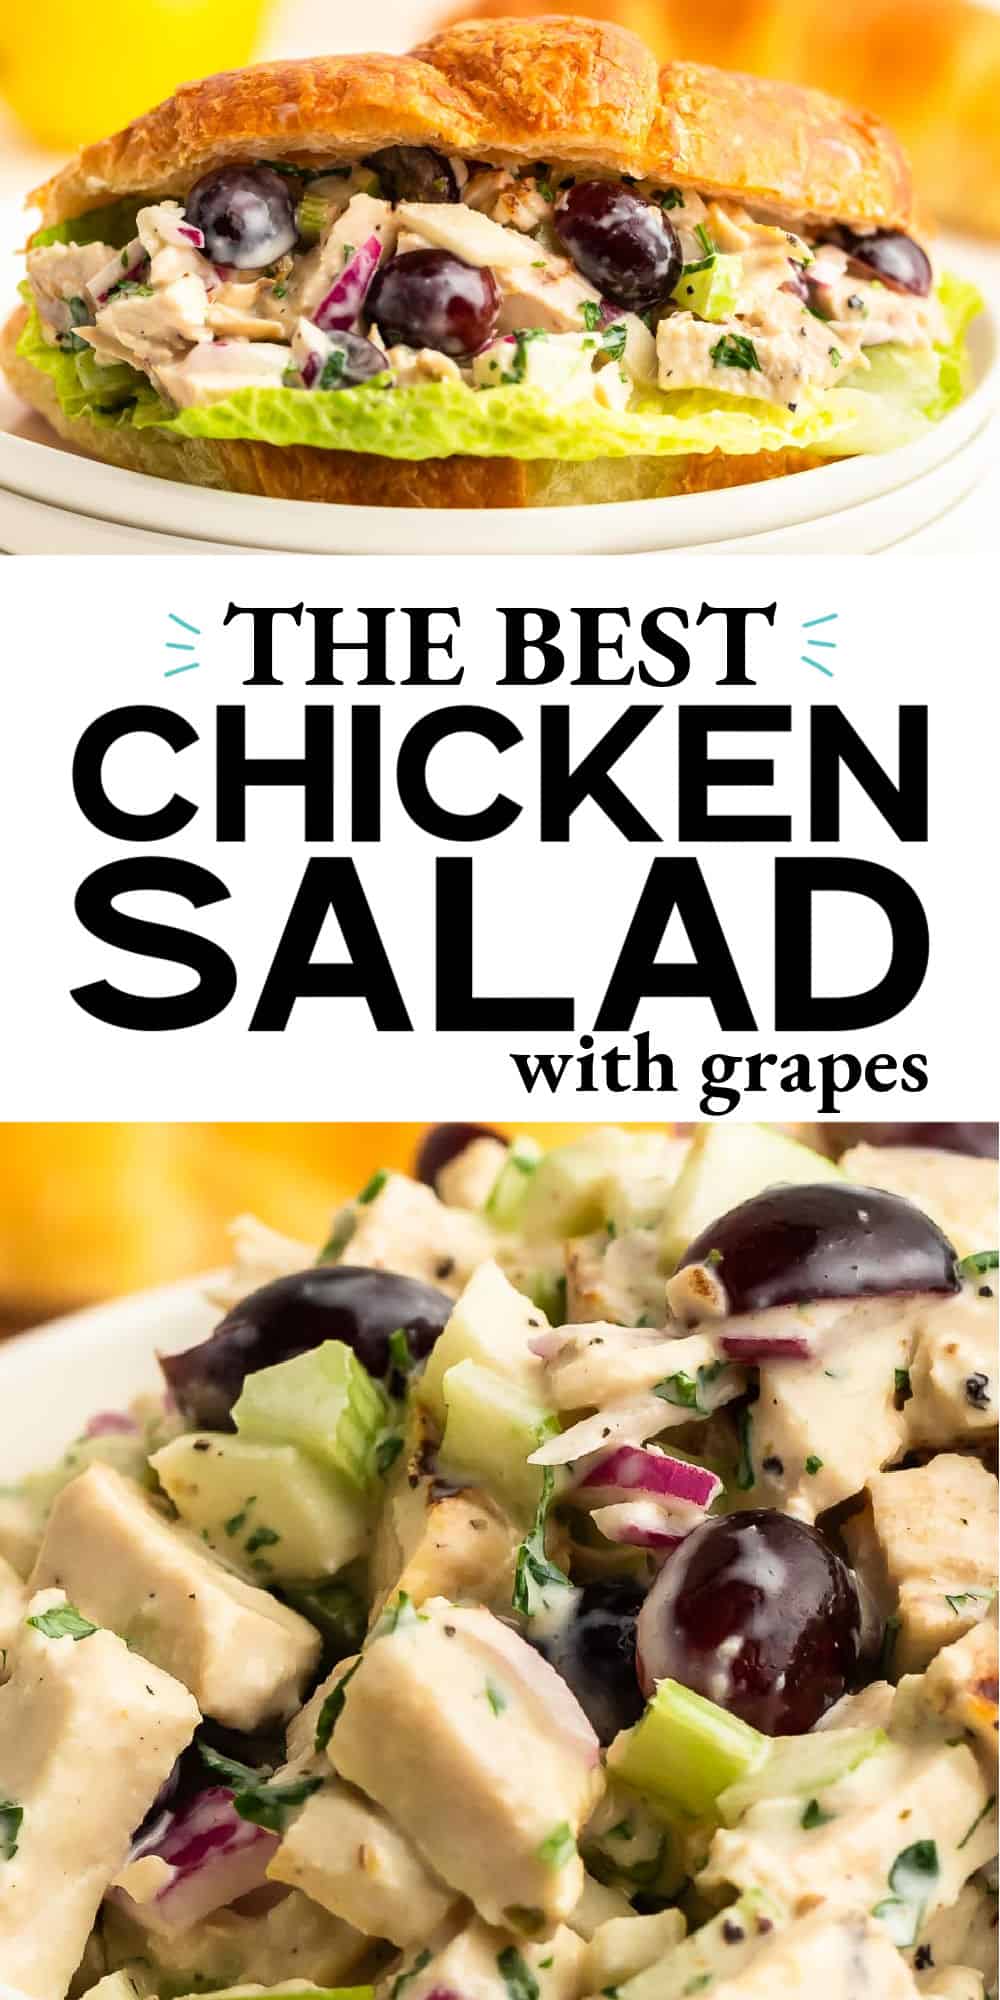 Creamy and crunchy with sweet and tangy flavors and a bit of spice thrown in! This delicious creamy Chicken Salad recipe is super easy to make using simple ingredients. A versatile recipe that can easily be customized to create a variety of dishes that you can add to your weekly rotation. #cheerfulcook #chickensalad #recipe #best  via @cheerfulcook